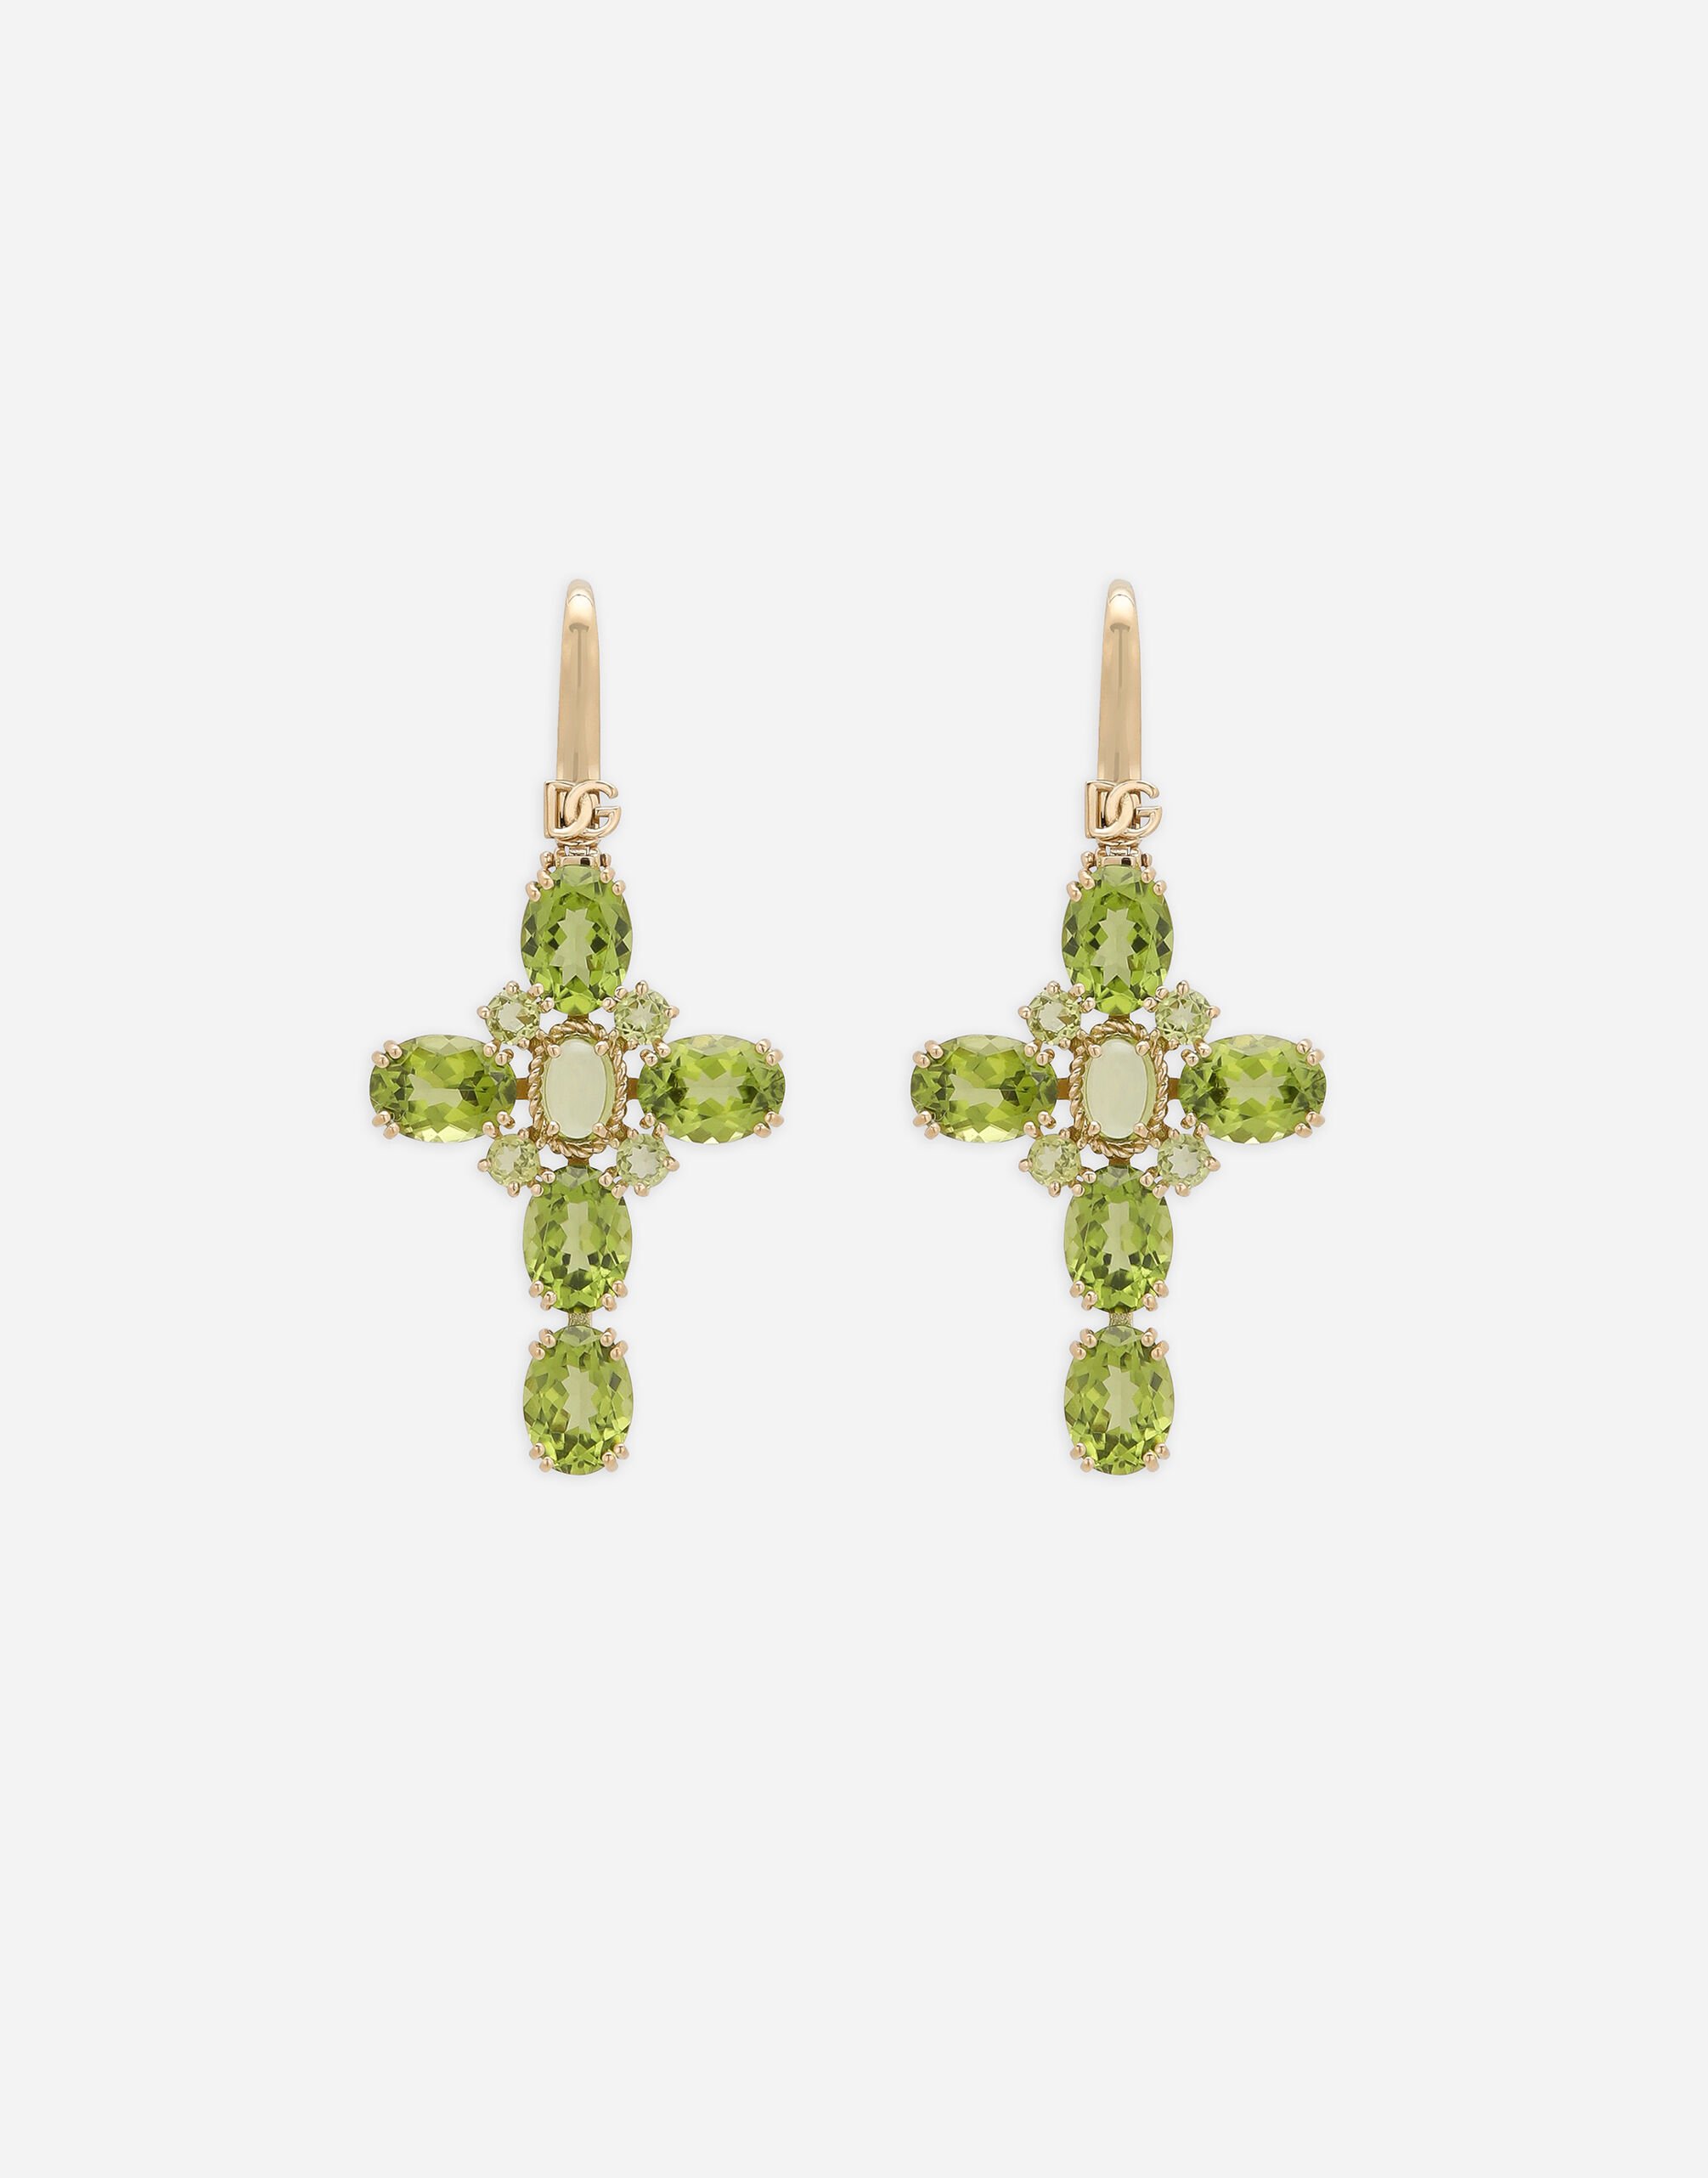 ${brand} Anna earrings in yellow gold 18Kt and peridots ${colorDescription} ${masterID}